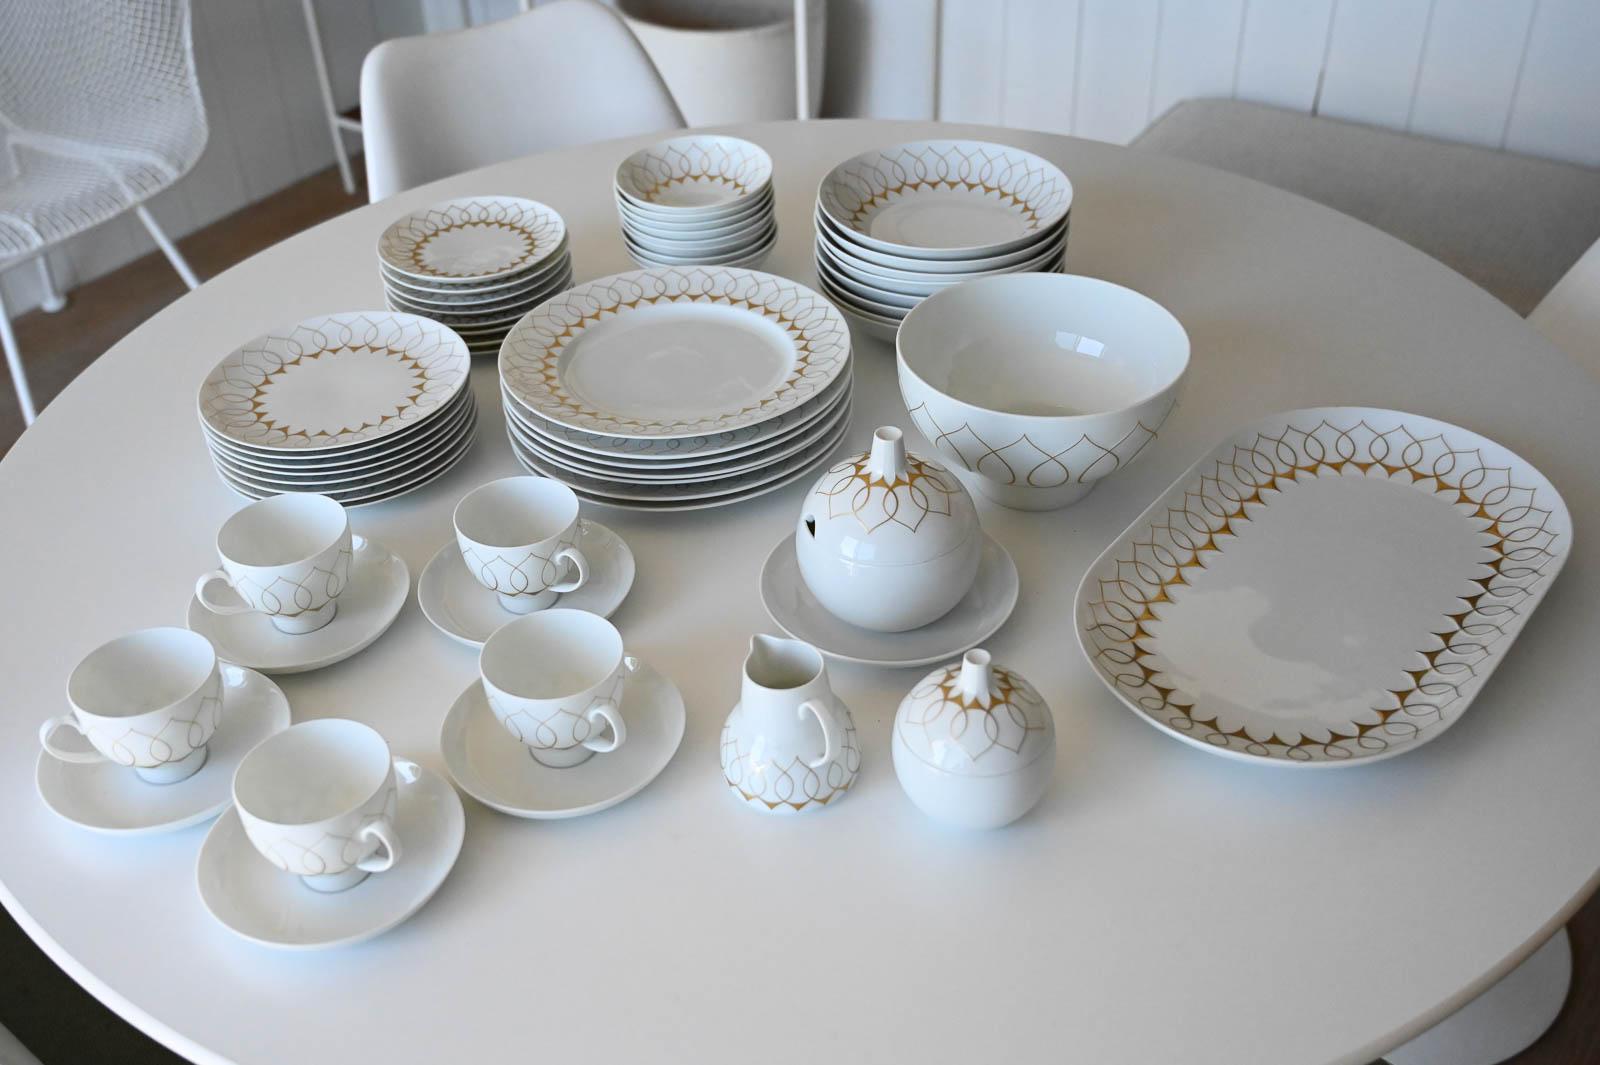 Bjorn Wiinblad for Rosenthal Gold Lotus Silhouette Tableware, Service for 8.  Beautiful set of service for 8 includes:

7 Dinner Plates
8 Salad Plates
8 Bread/Dessert Plates
8 Large Soup/Salad Bowls
8 Small Soup Bowls
1 Large Serving Bowl
1 Large